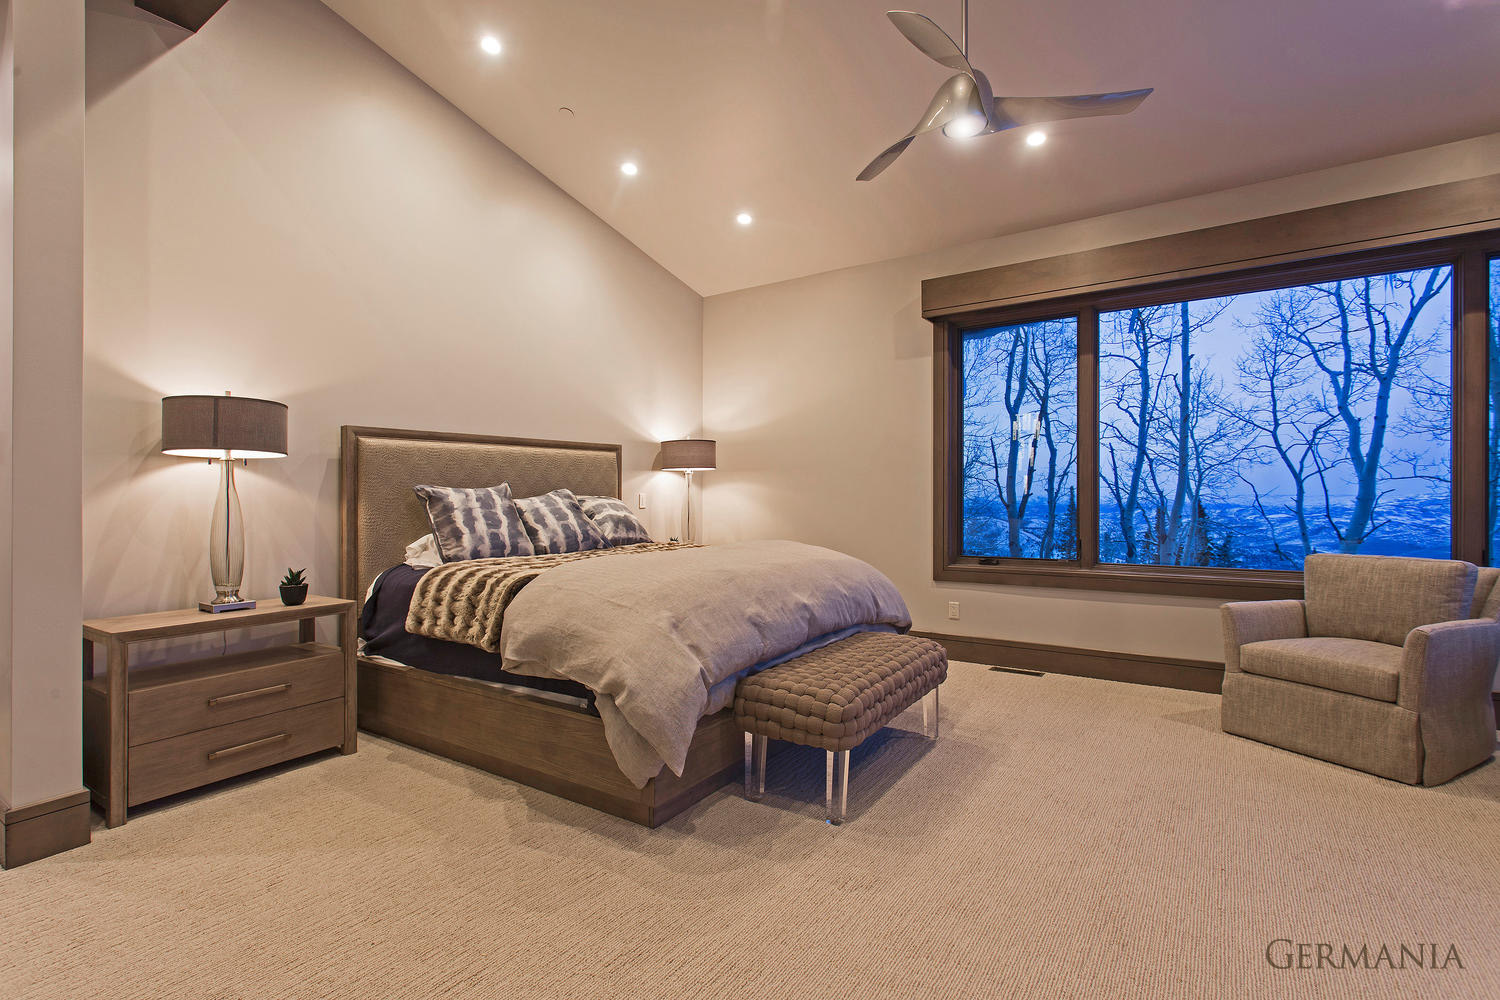 Build your dream house master bedroom with Germania Construction. Even the smaller details such as carpet and light fixtures are never missed and never ignored!